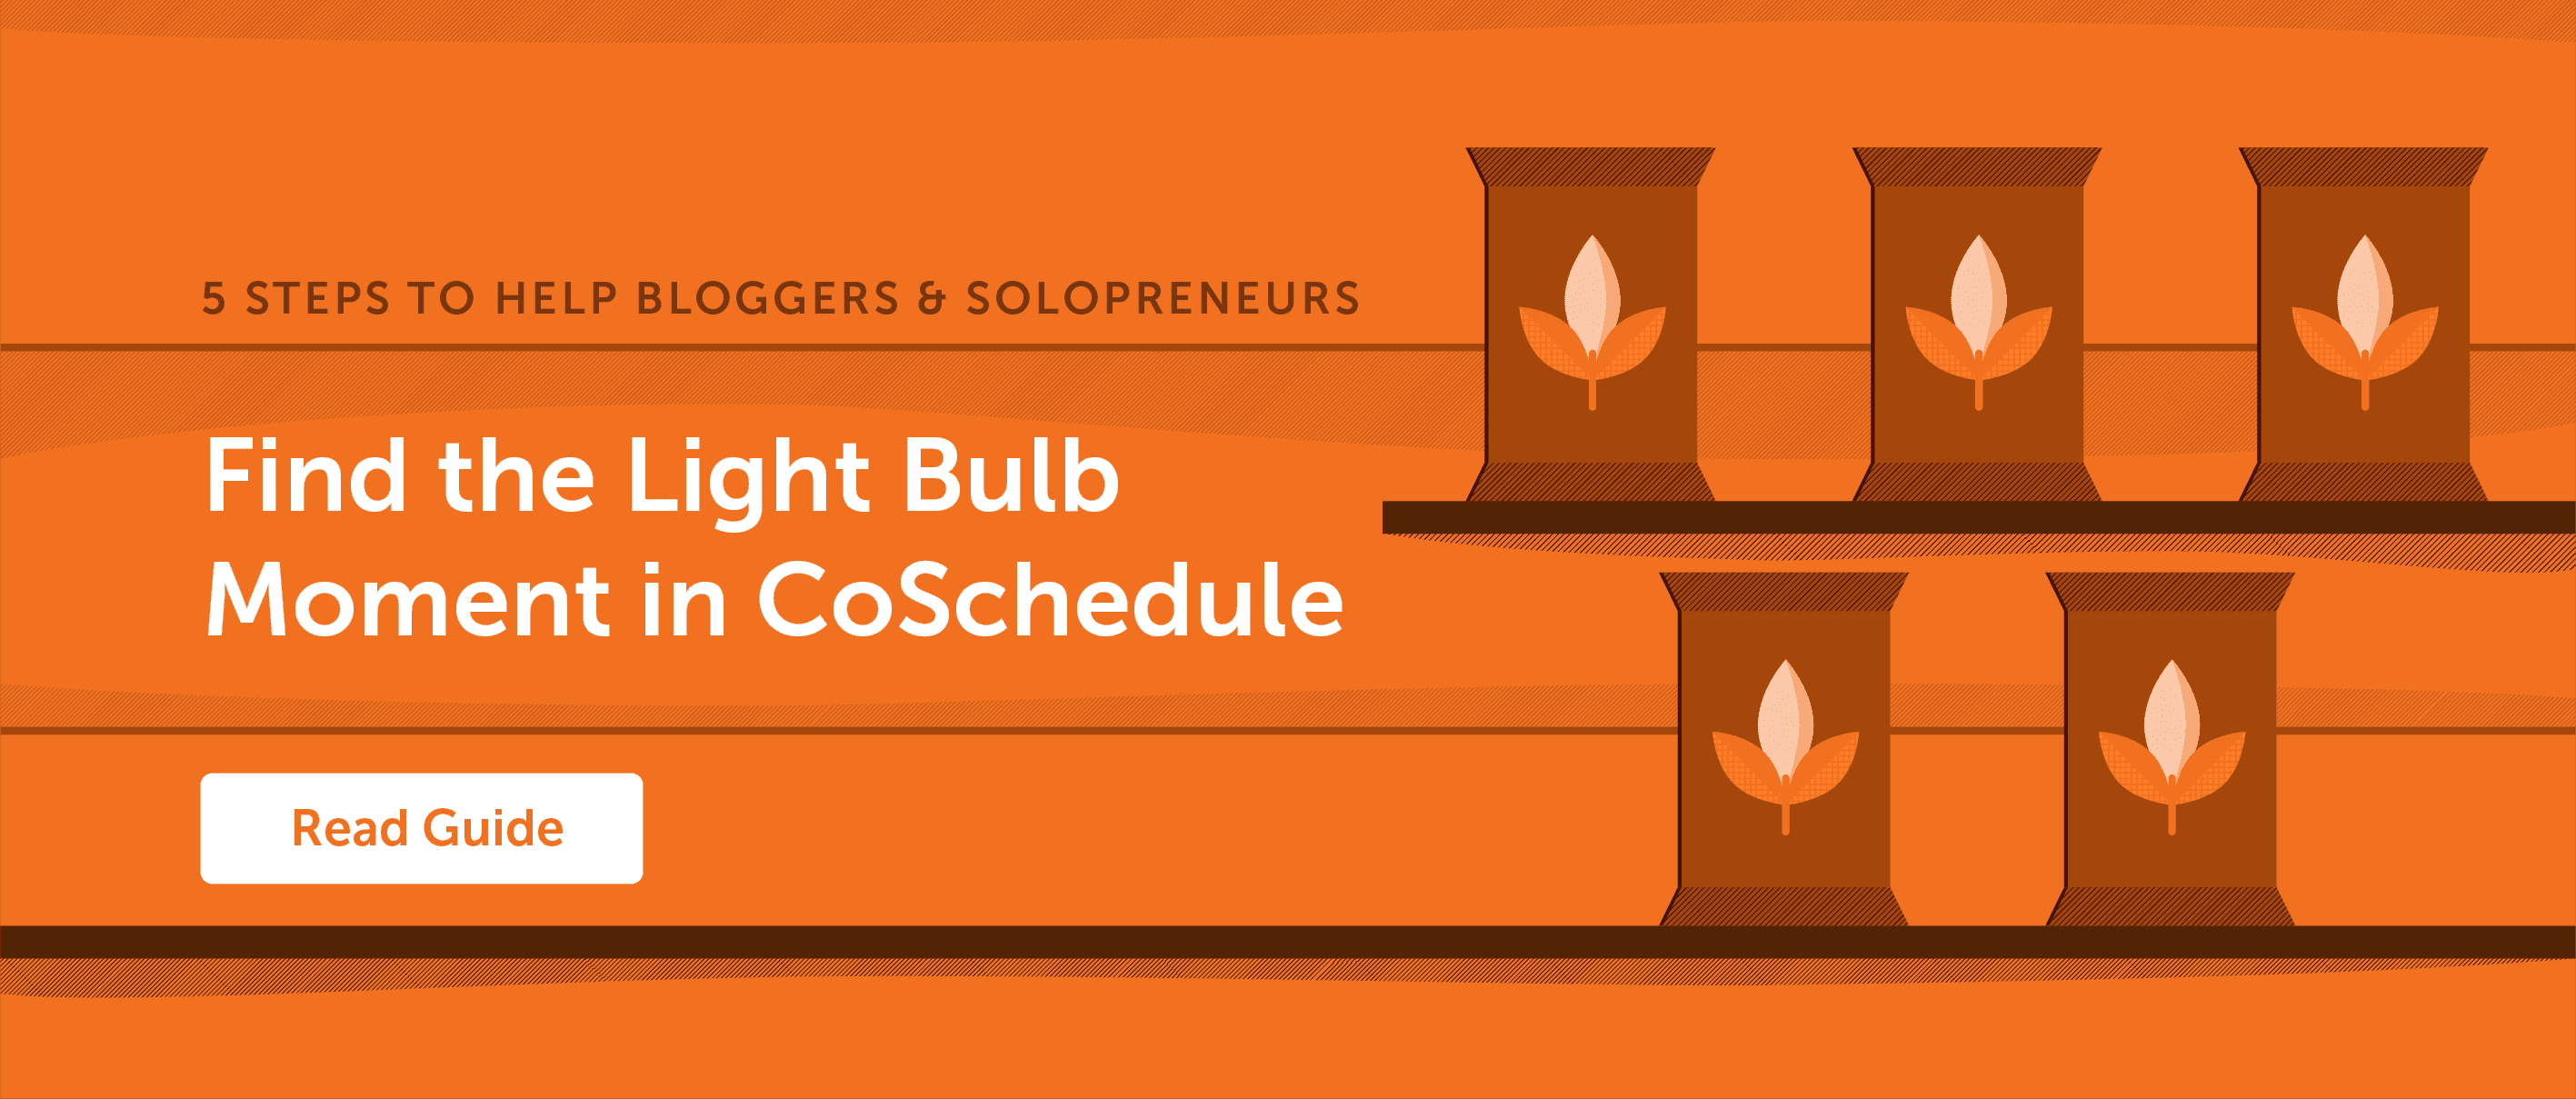 5 Steps to Help Bloggers & Soloprenuers find the light bulb moment in CoSchedule